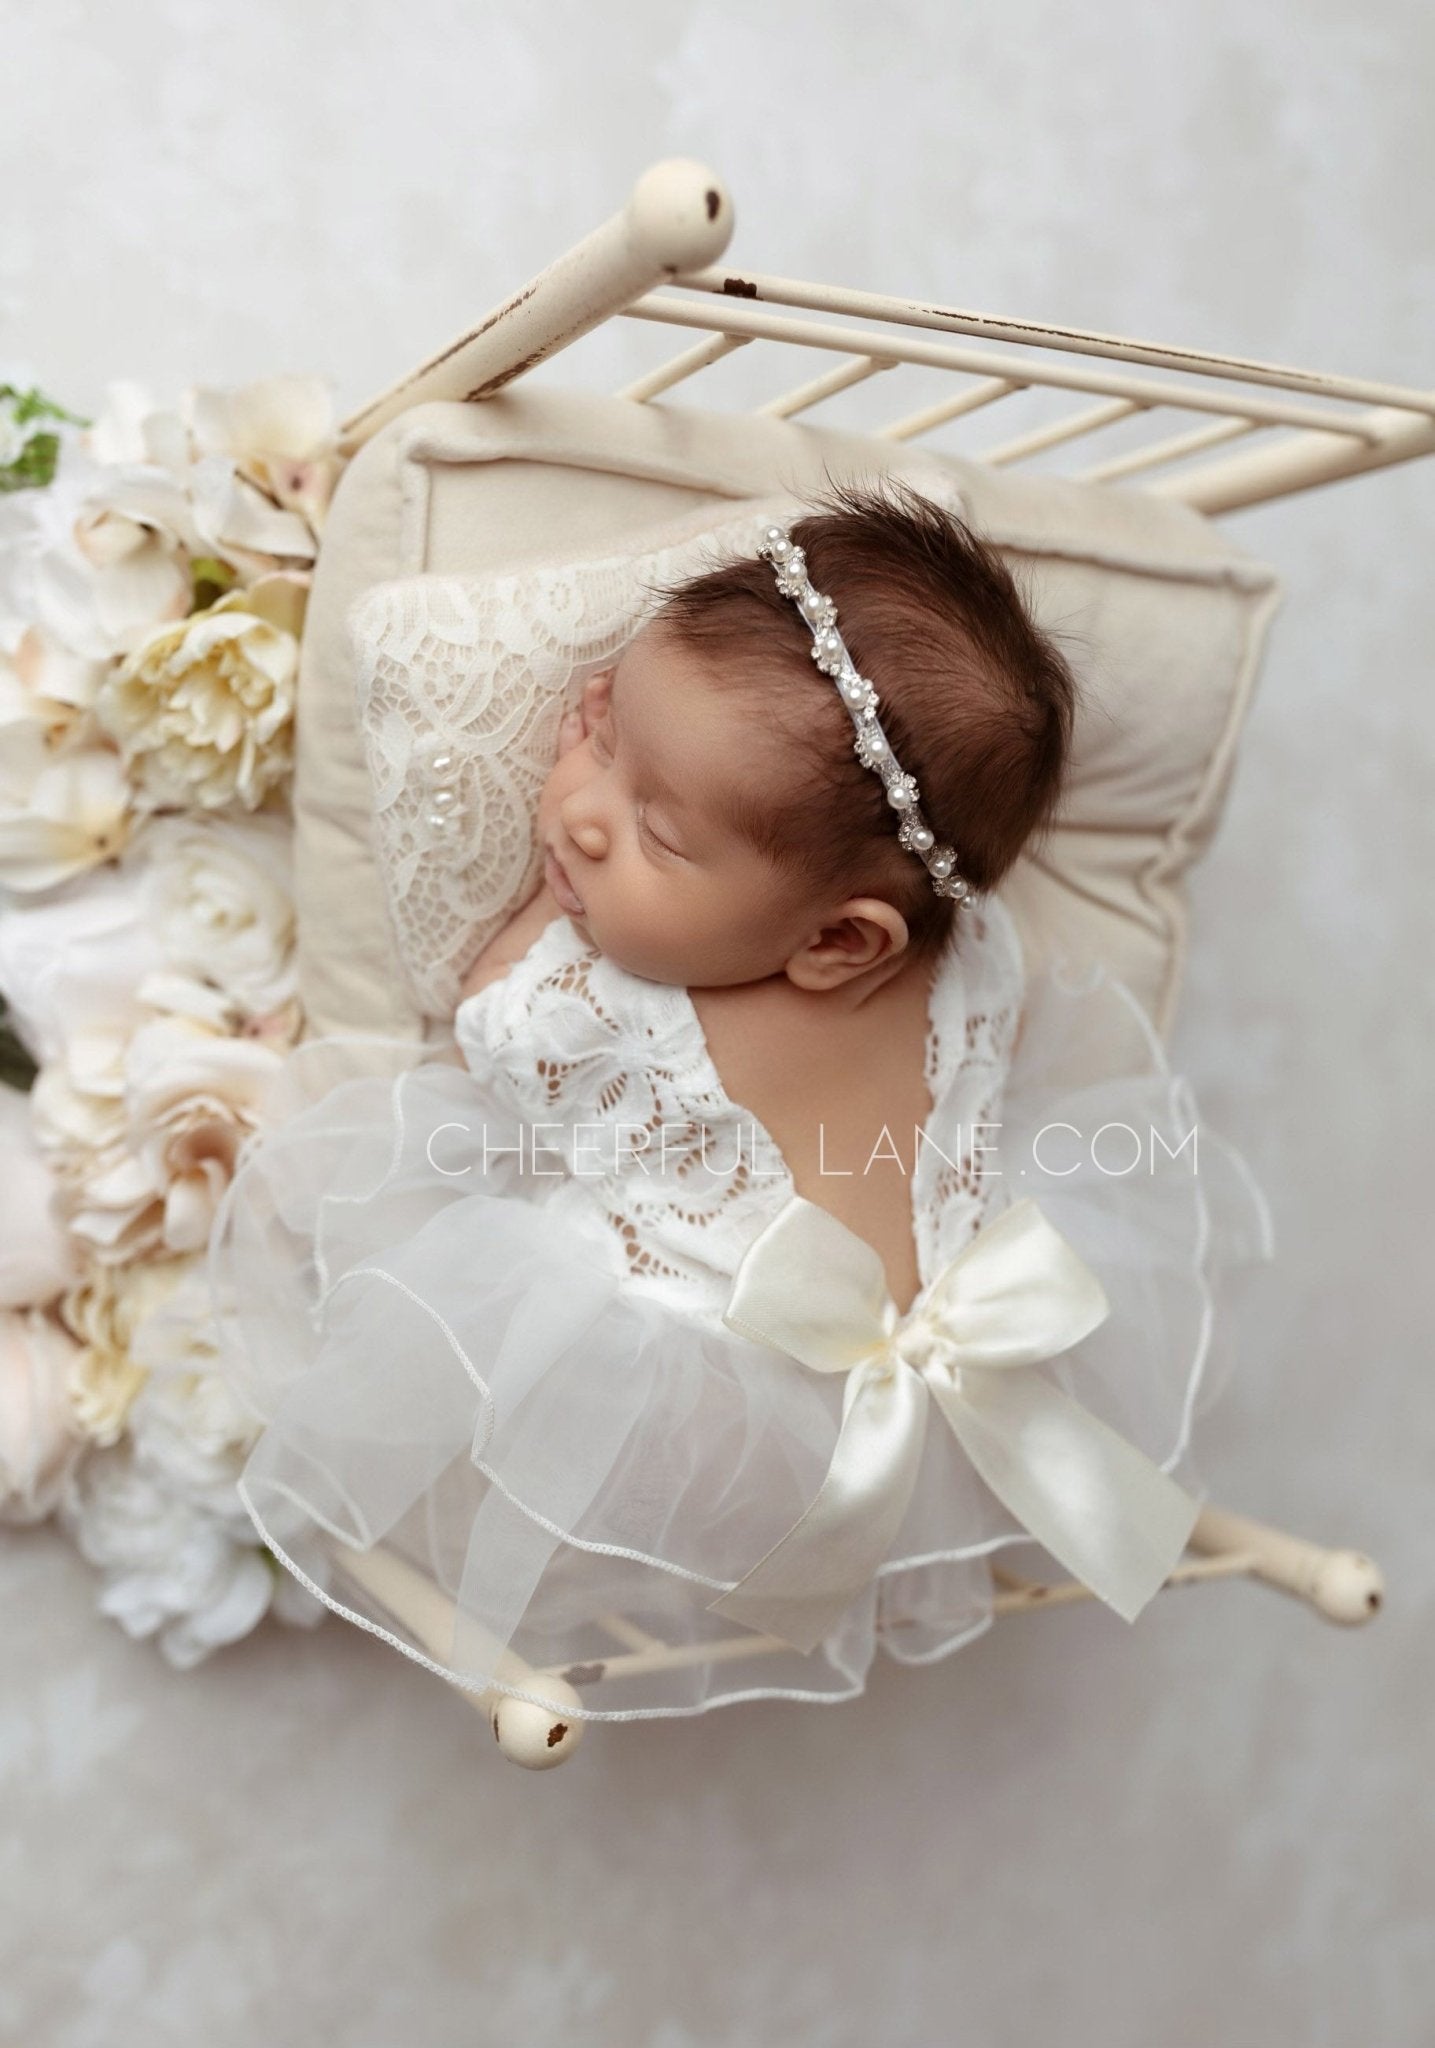 Newborn Photo Prop Lace Romper with open back and ruffle skirt - Cheerful Lane